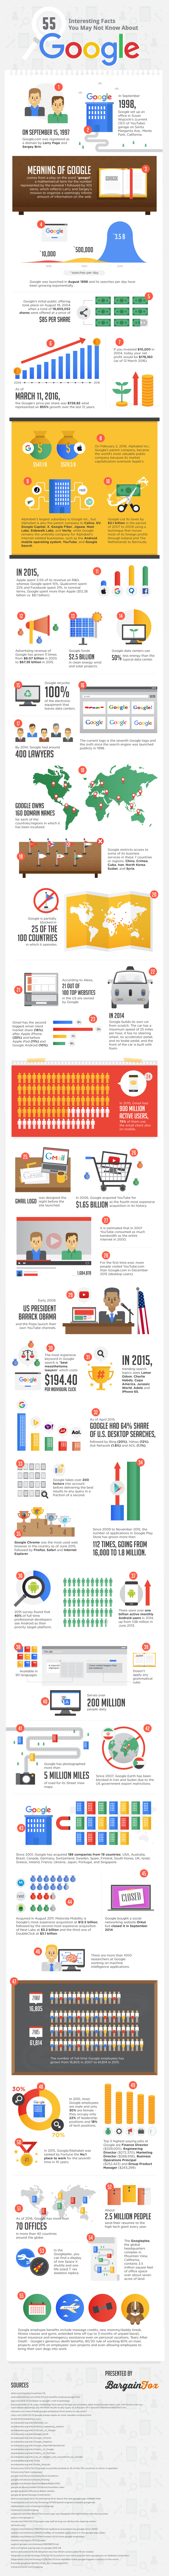 55 Facts You May Not Know About Google